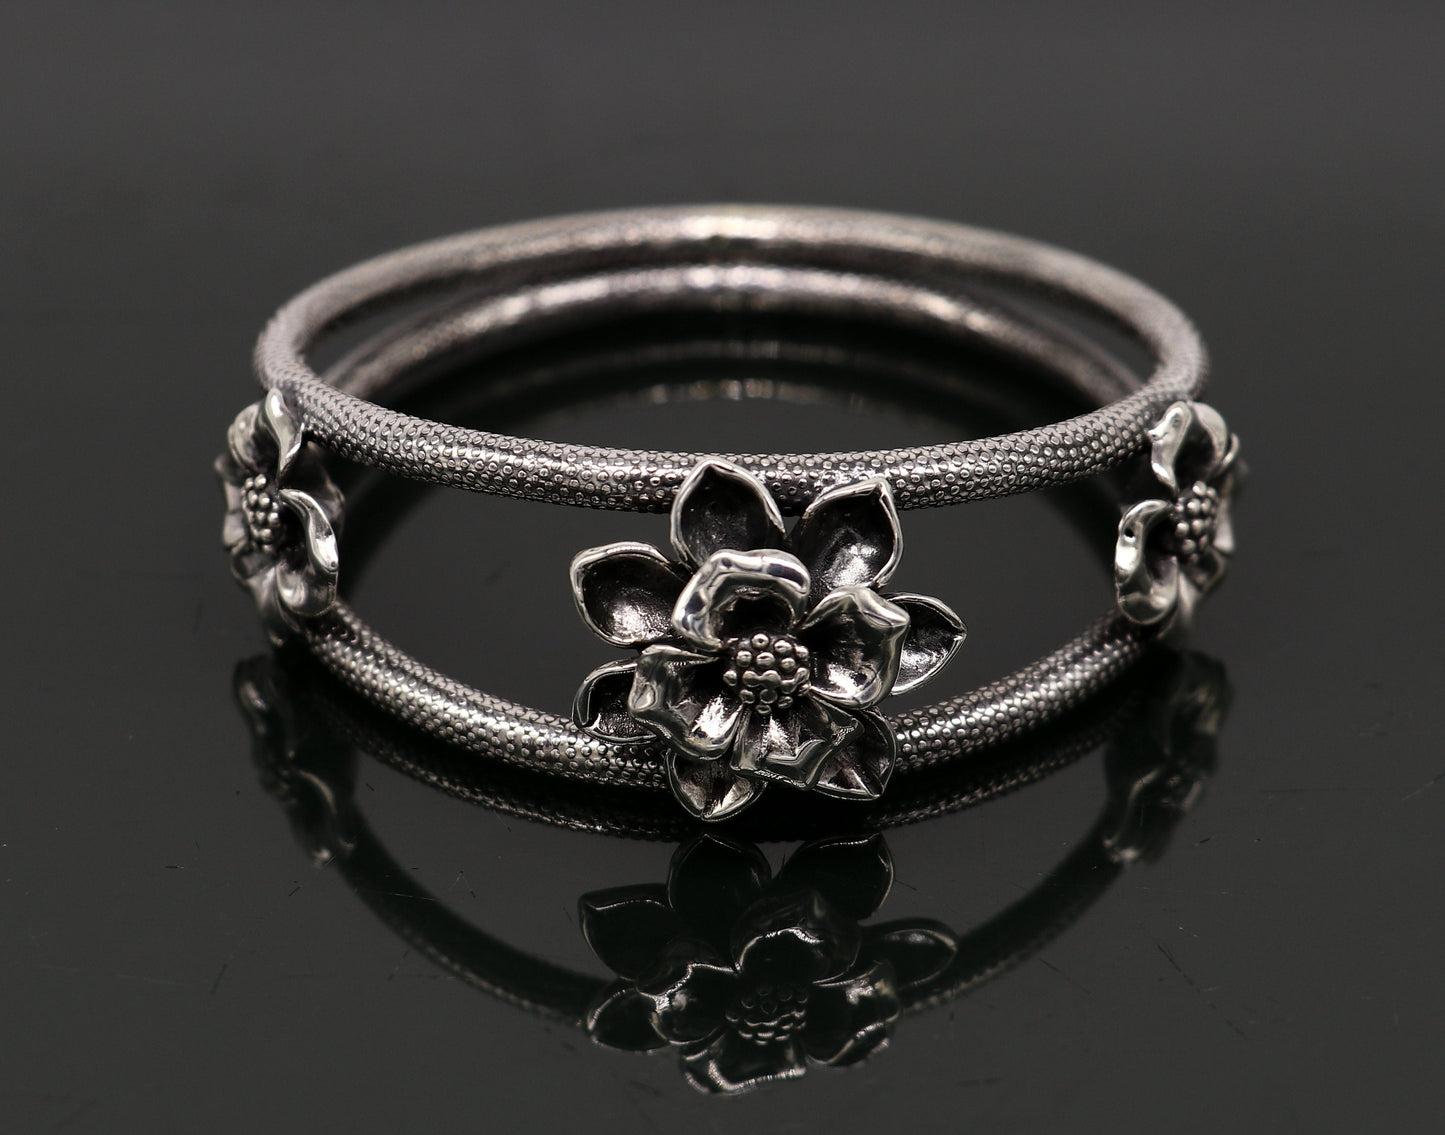 925 sterling silver handmade fabulous flower work vintage design bangle bracelet, excellent traditional style wedding jewelry nba158 - TRIBAL ORNAMENTS